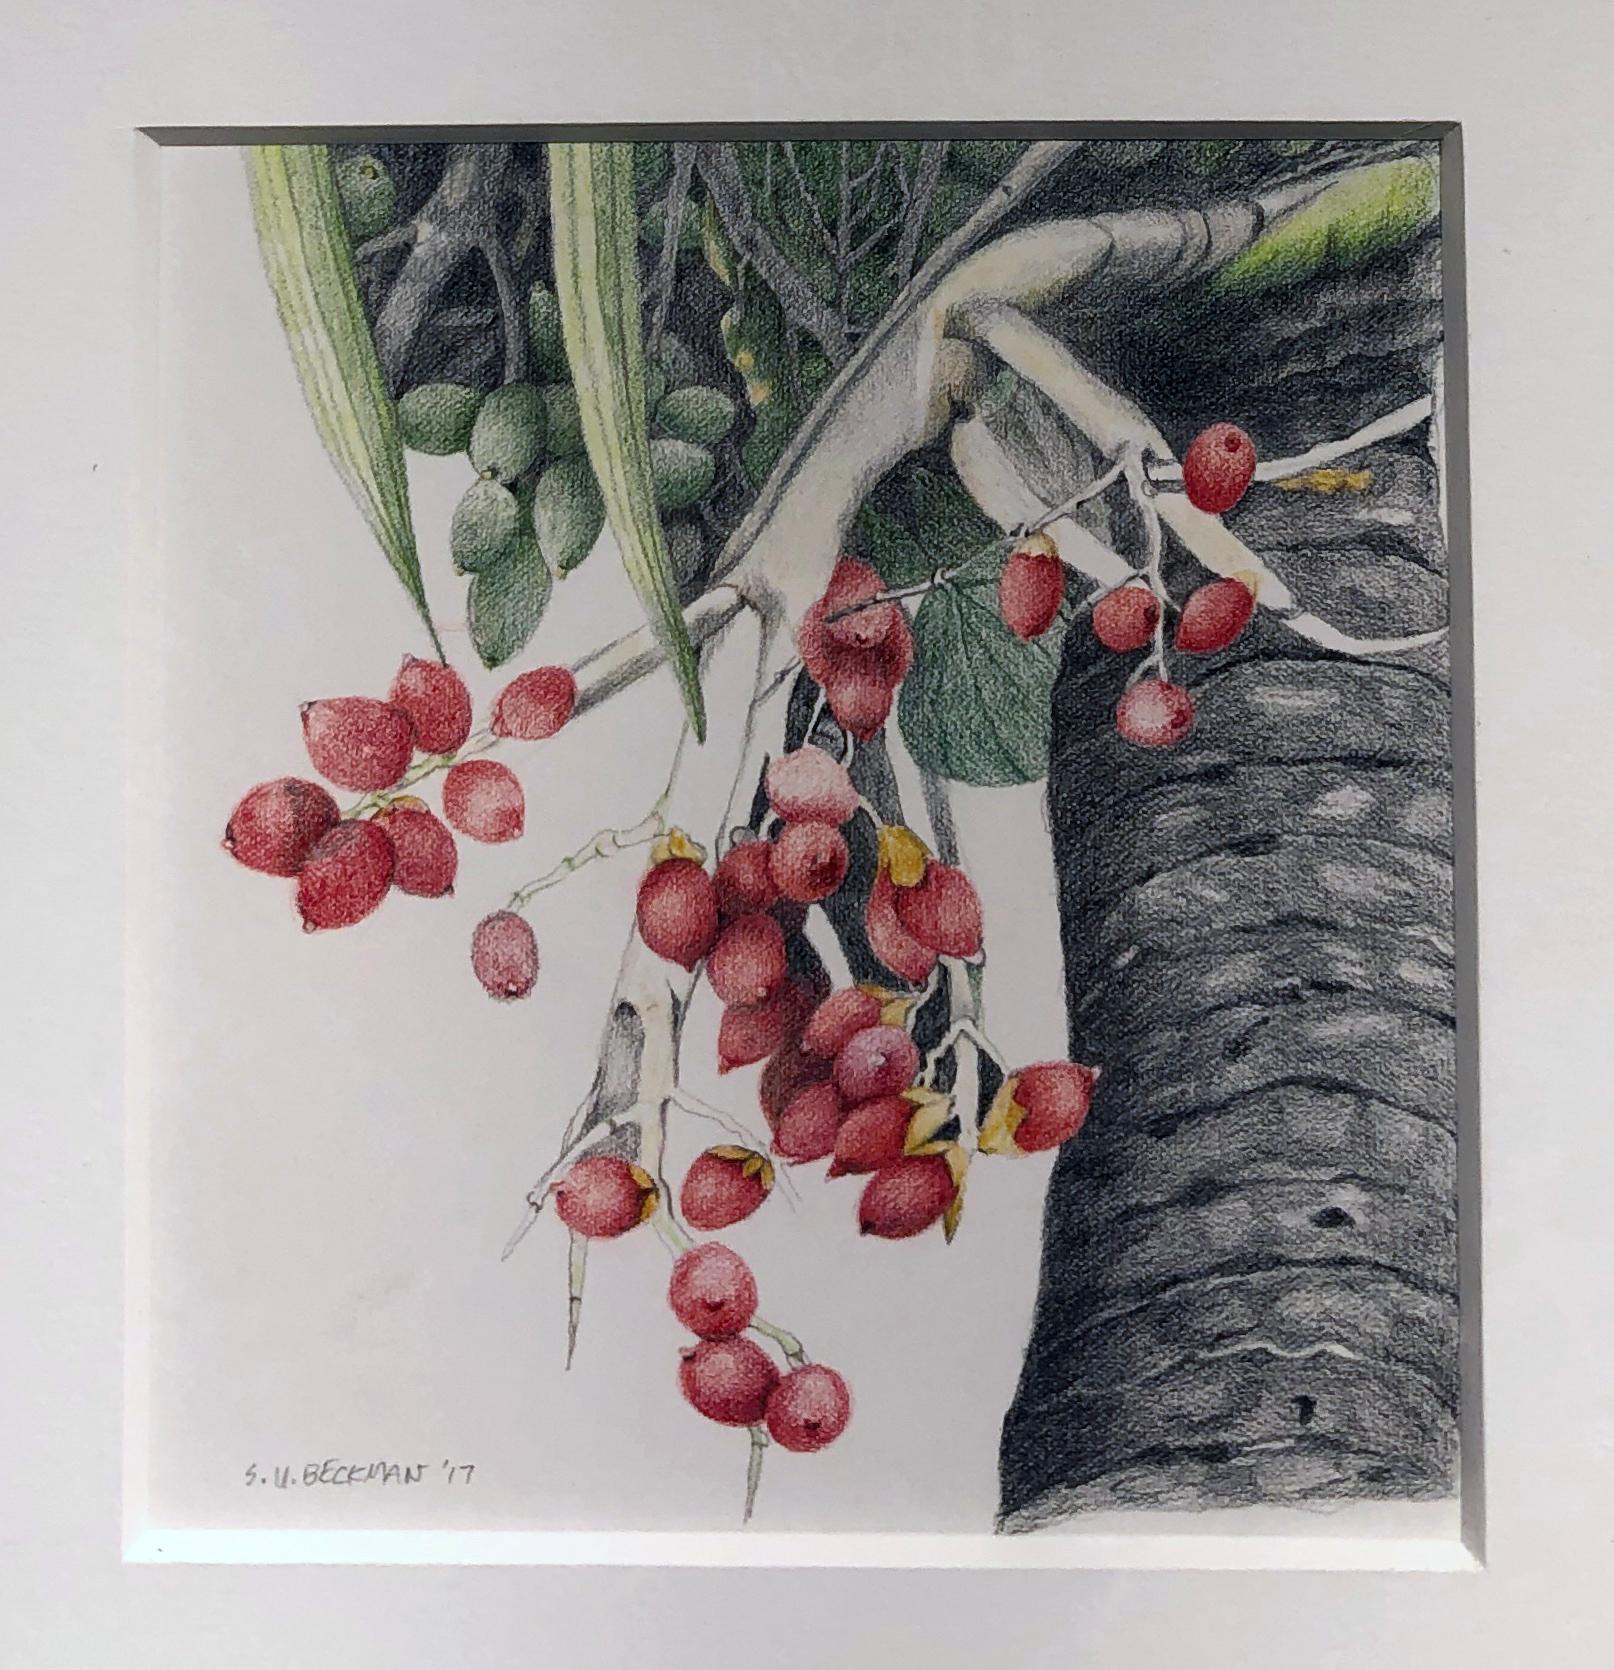 Named for its red fruit that tends to bloom during the Holiday Season, the Christmas Palm is shown here with all its beautiful flowers.  Drawn in colored pencil with fine detail, this botanical drawing is matted with a heavy white mat and framed in